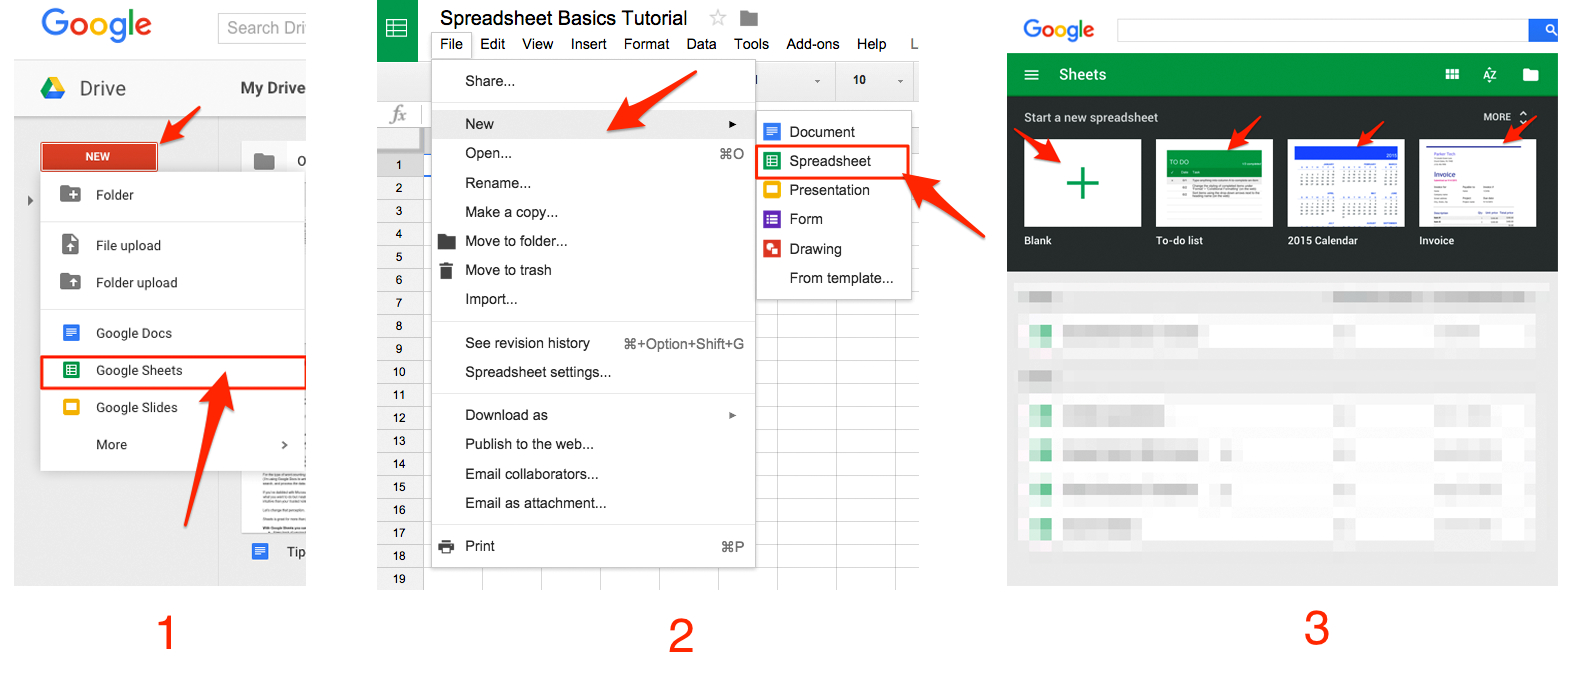 How To Create A Spreadsheet In Google Docs In Google Sheets 101: The Beginner's Guide To Online Spreadsheets  The